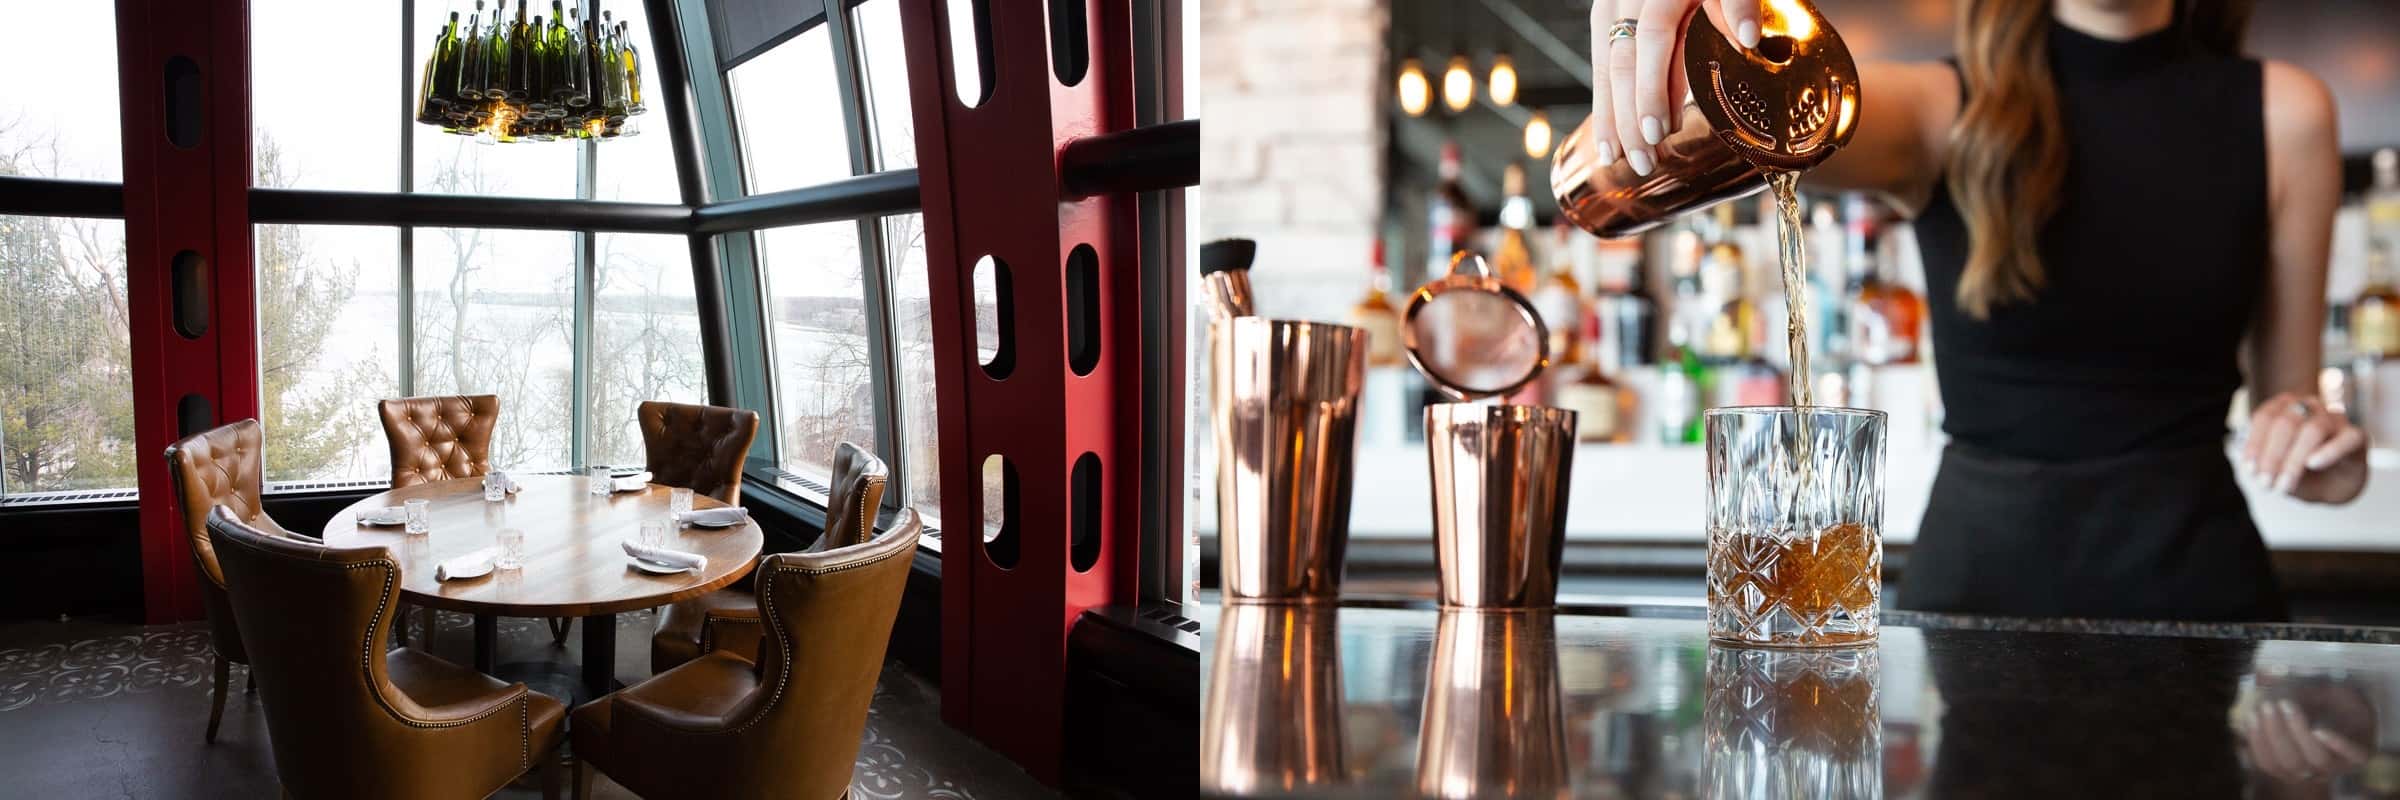 New restaurant has the best views of Niagara Falls: REDS Kitchen + Wine Bar. Niagara Falls’ newest dining experience combines a modern tavern atmosphere with a made-from-scratch menu, a carefully curated wine list, and delicious hand-crafted cocktails.